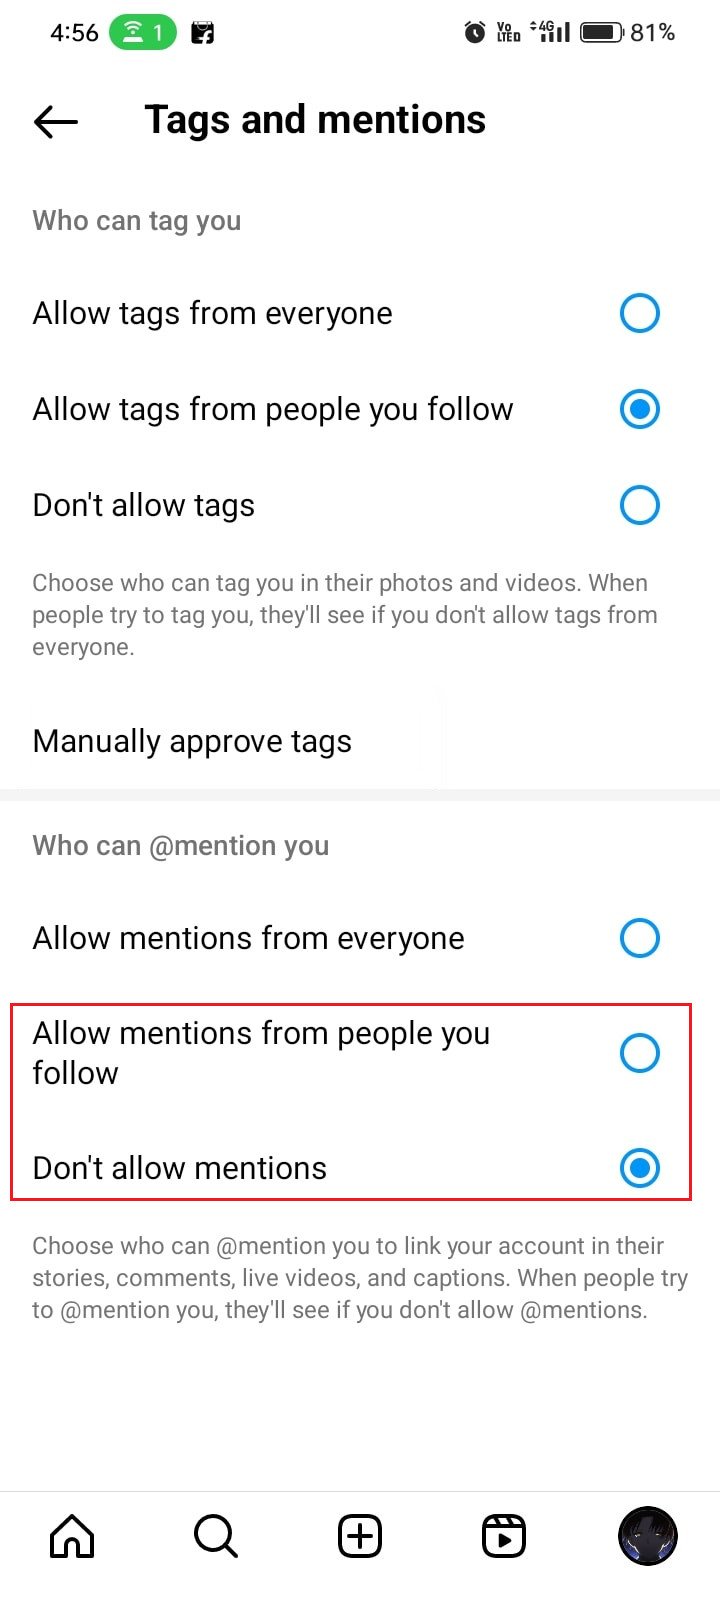 Who can @mention you section - Don't allow mentions or Allow mentions from people you follow radio button